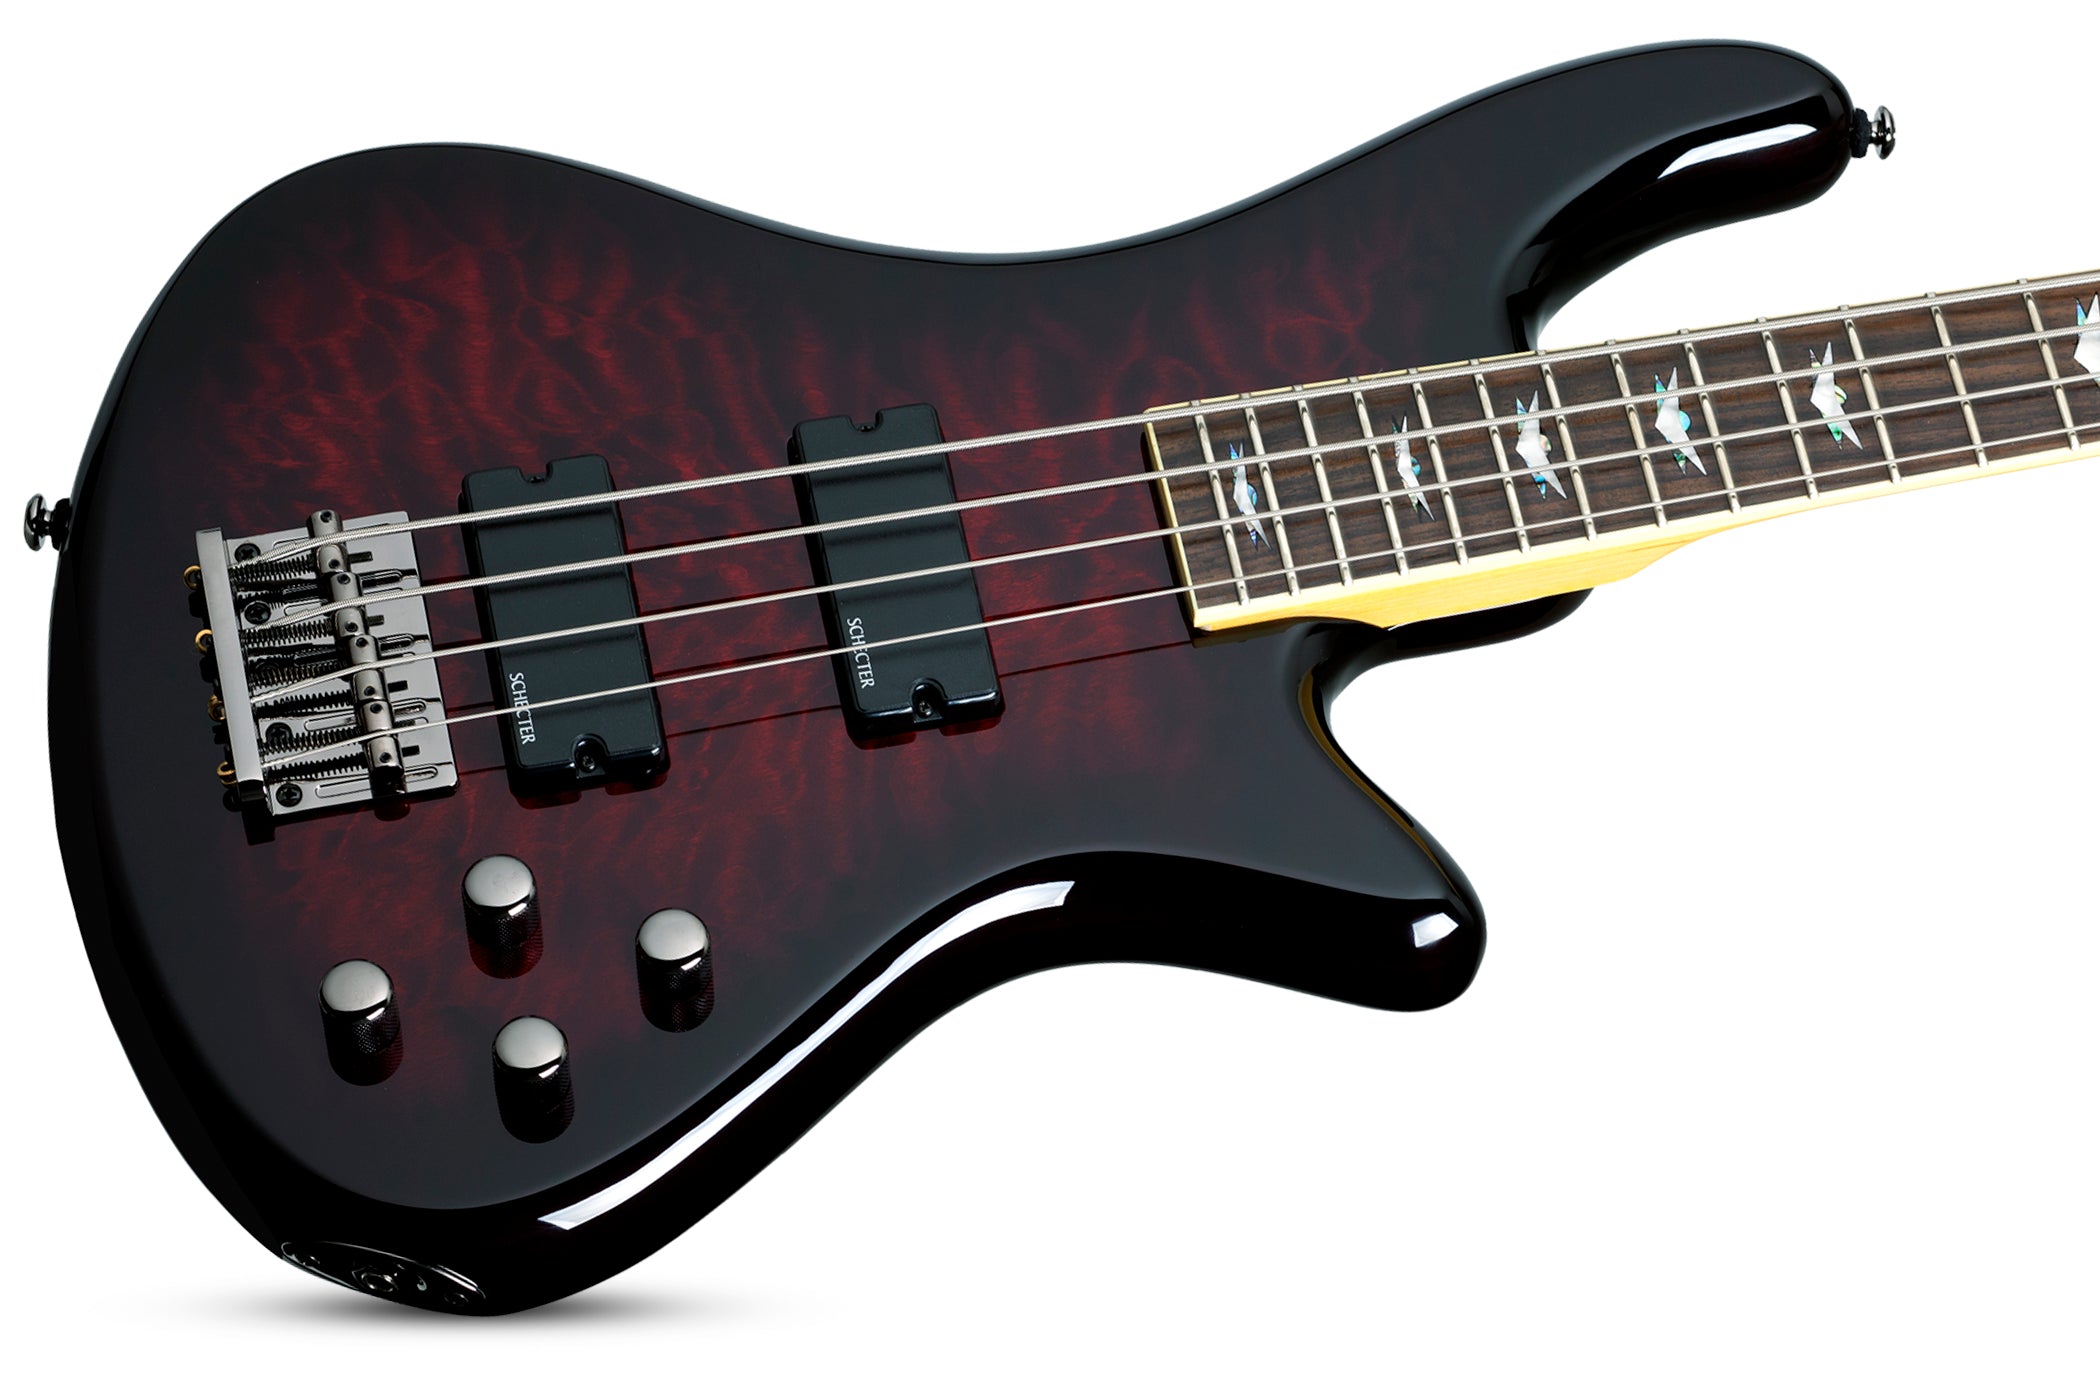 SCHECTER STILETTO EXTREME-4 STRING BASS GUITAR - BLACK CHERRY (2500) MADE IN INDONESIA, SCHECTER, BASS GUITAR, schecter-bass-guitar-stiletto-extreme4-bc, ZOSO MUSIC SDN BHD